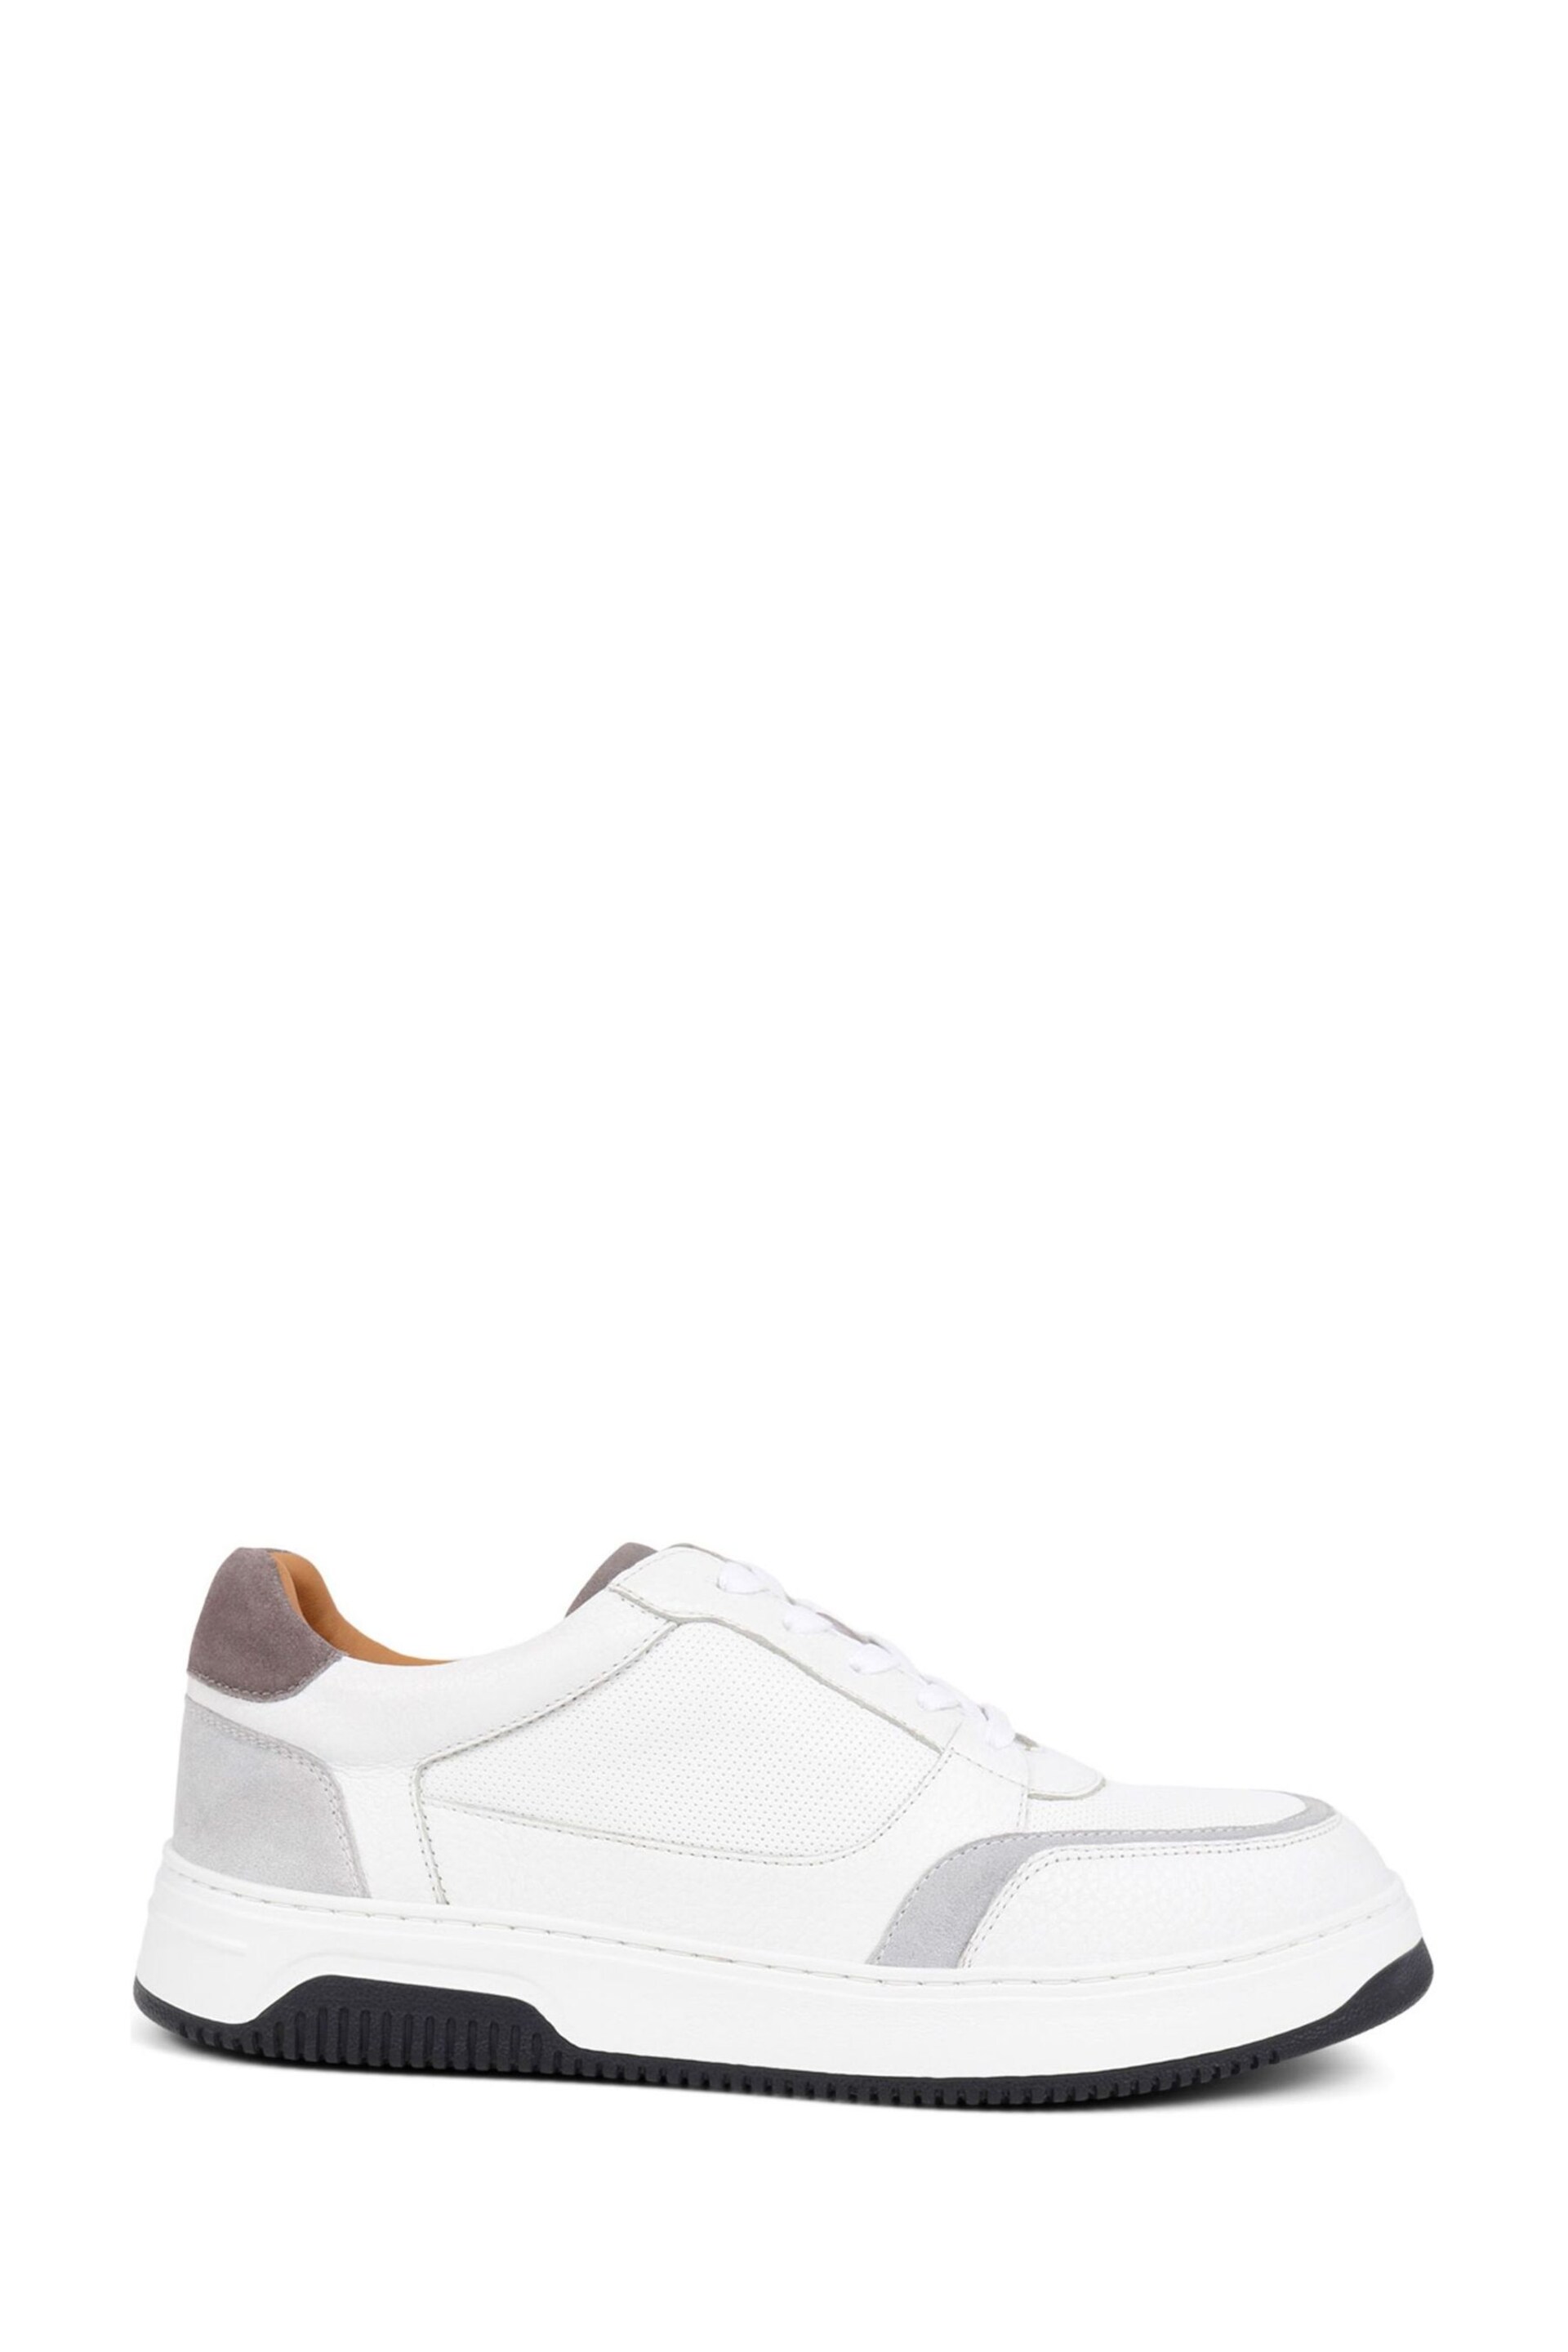 Pavers White Lace-Up Leather Trainers - Image 1 of 5